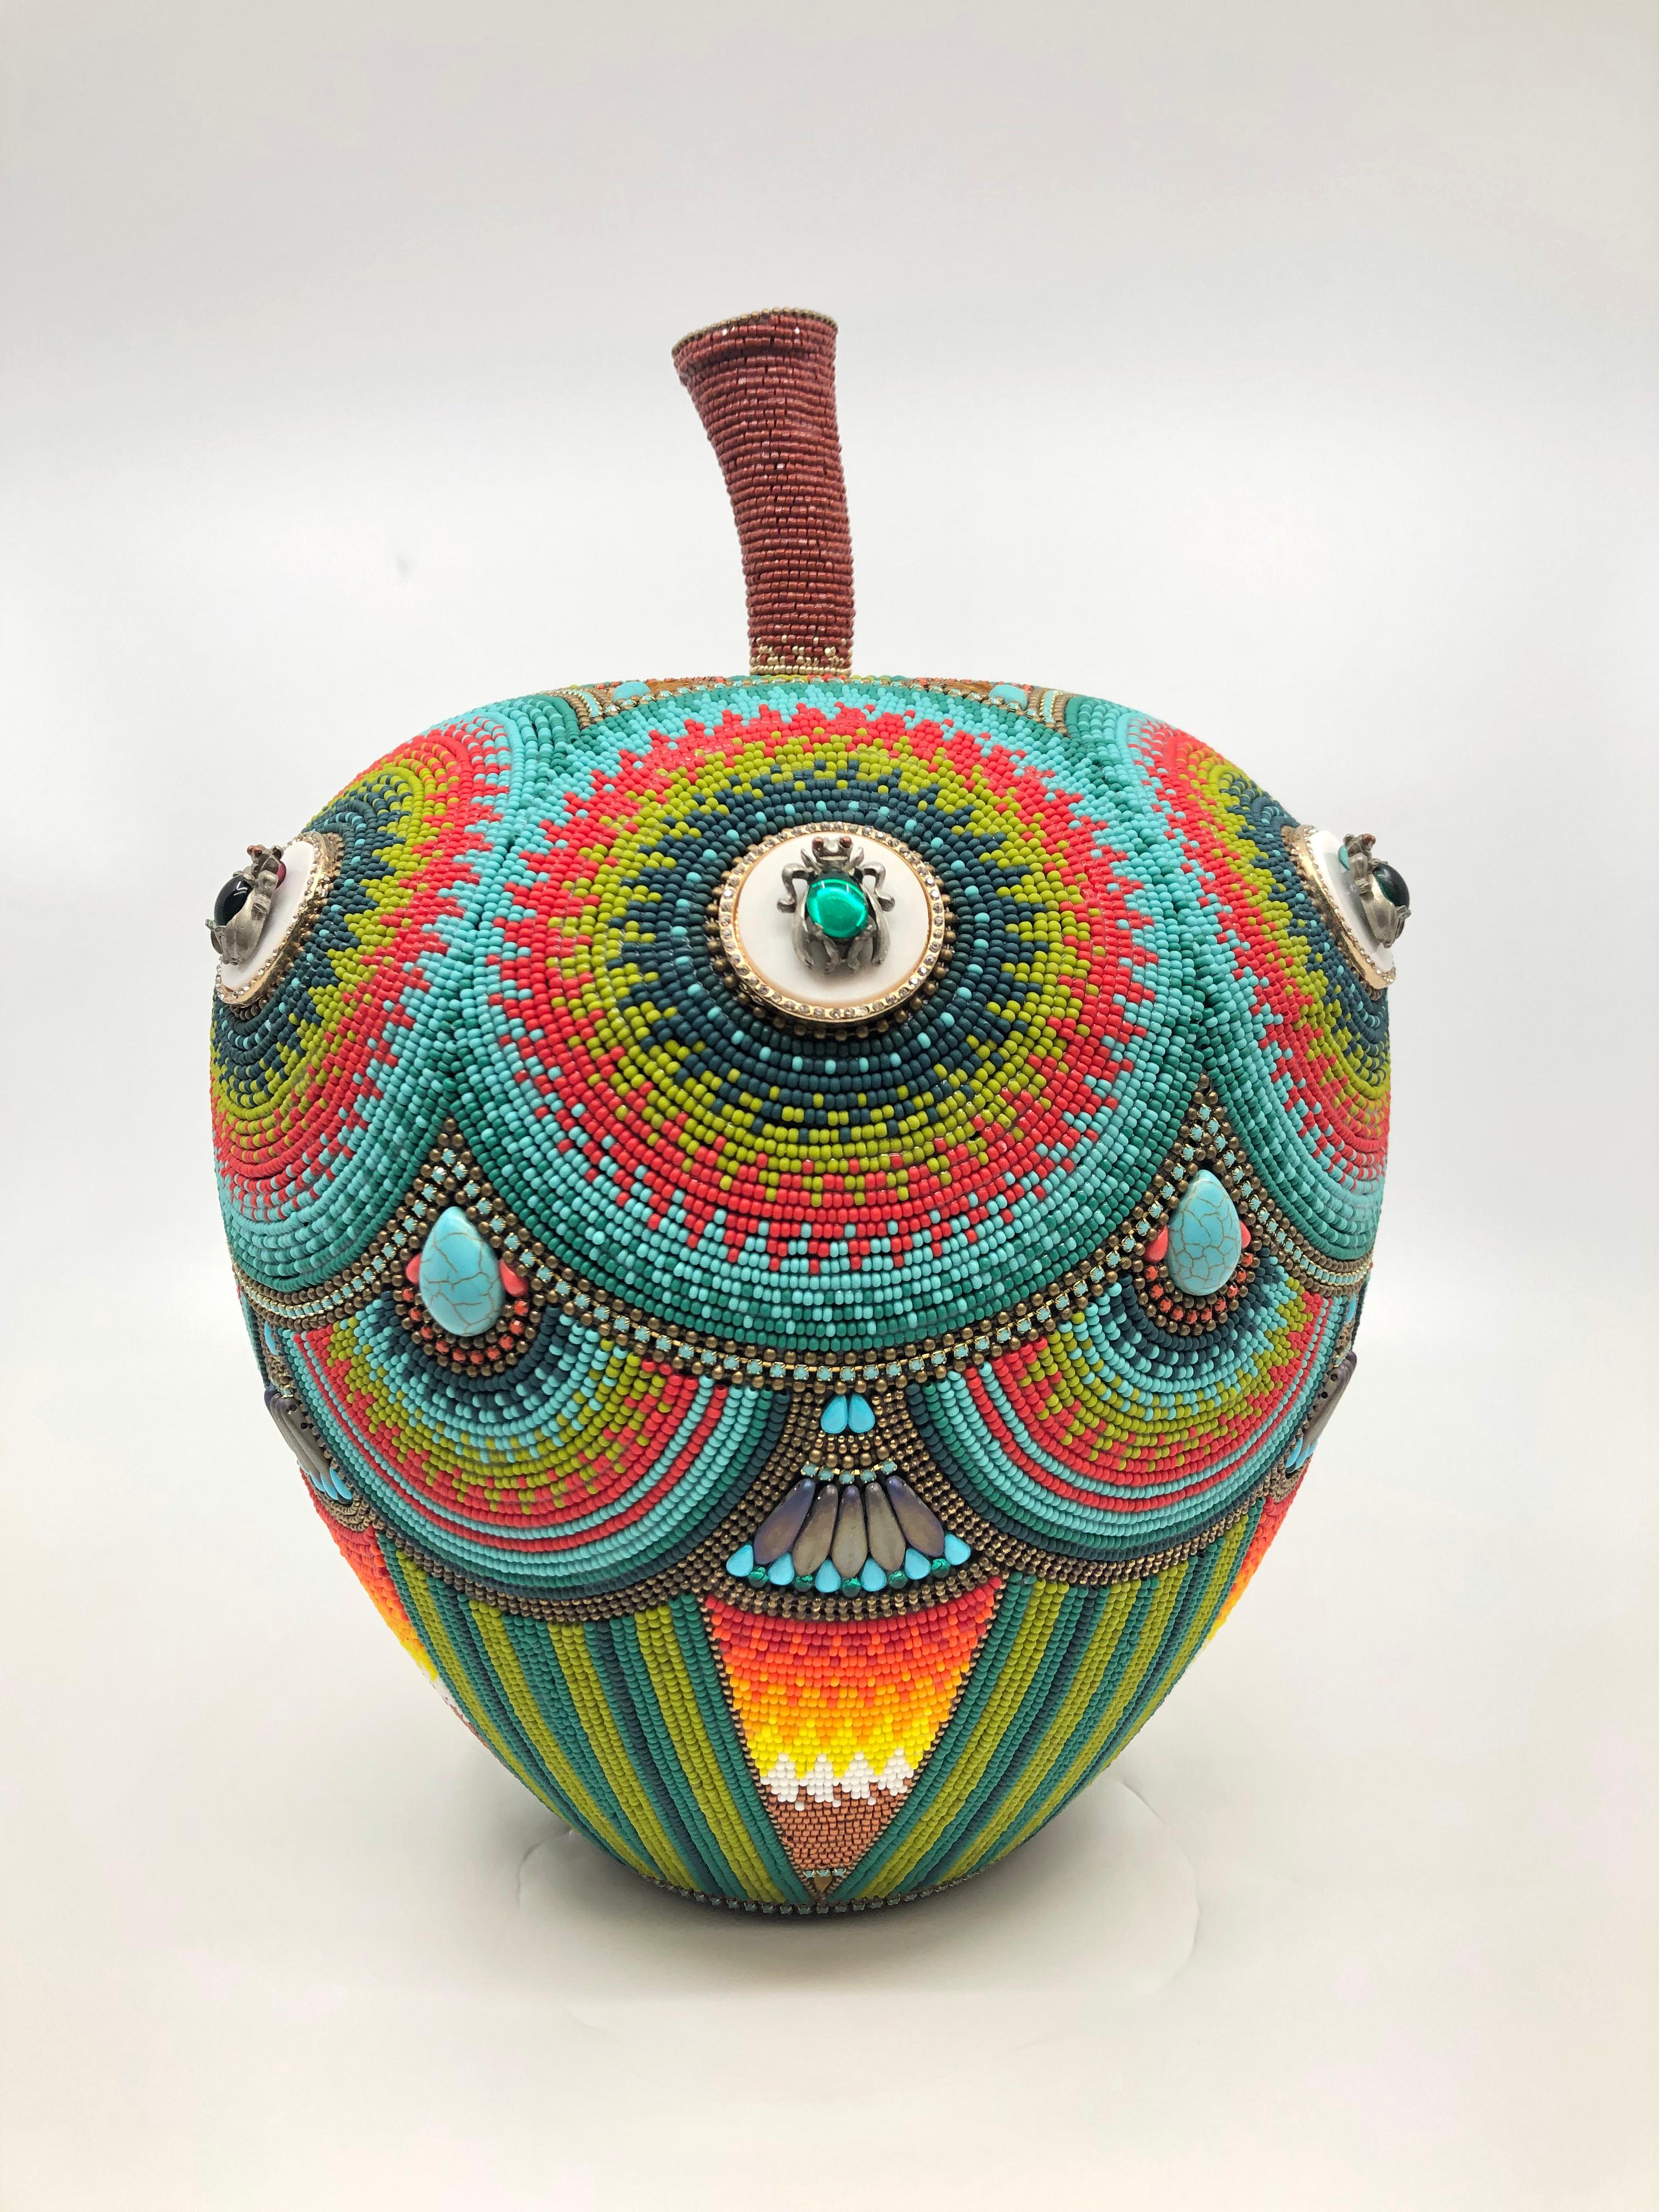 Jan Huling Still-Life Sculpture - "Apple", Contemporary, Mixed Media, Beaded, Sculpture, Fruit, Colorful, Pattern